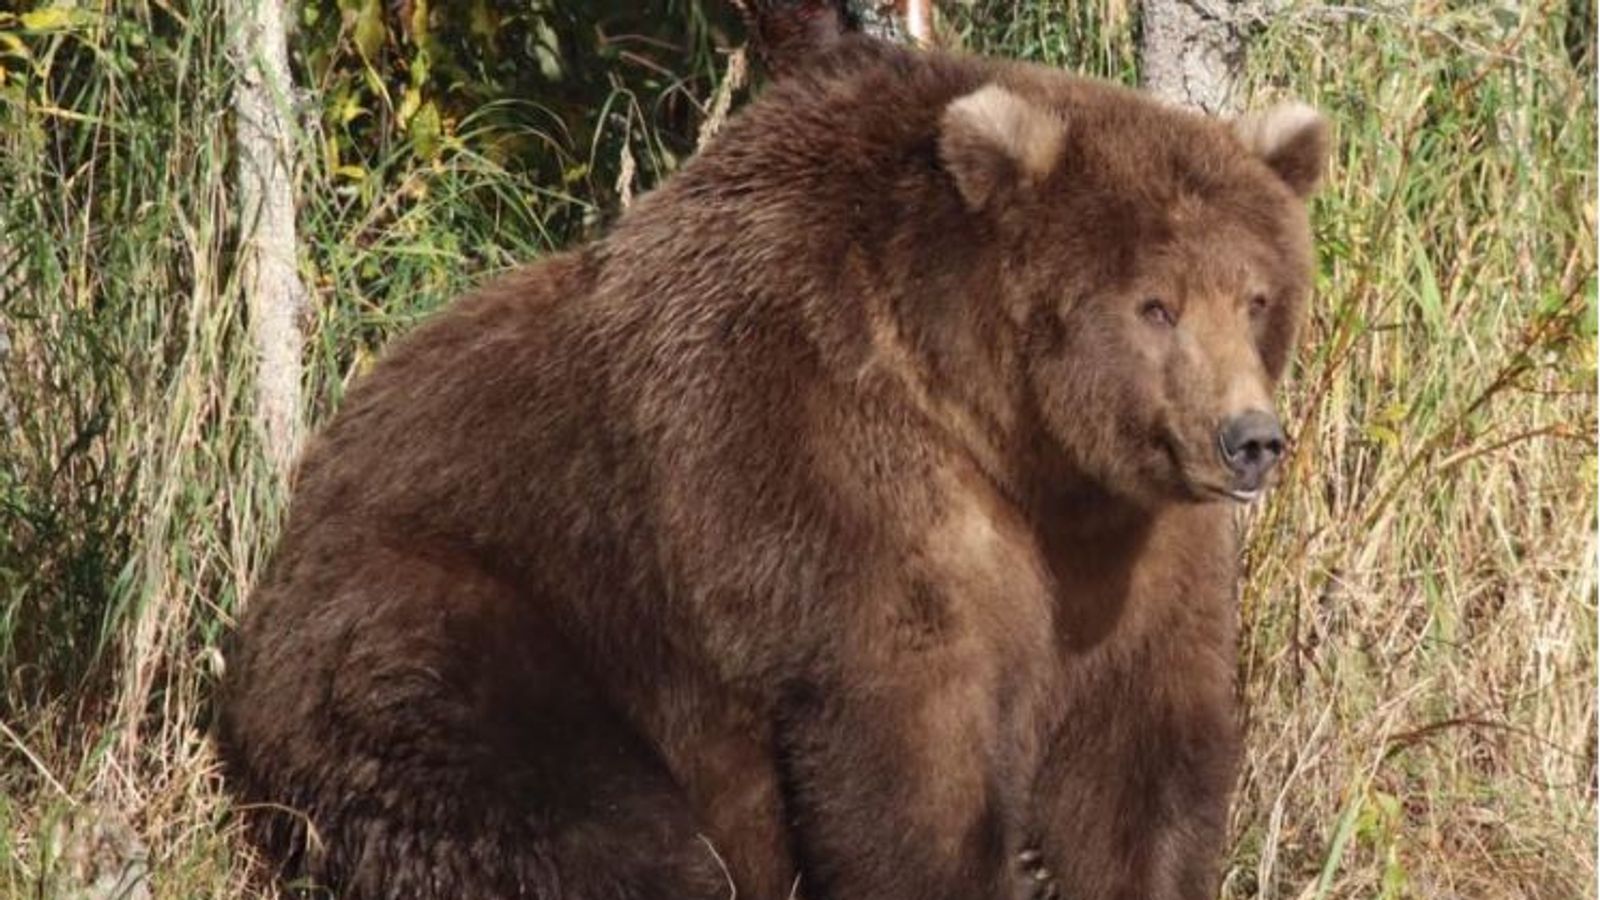 Beadnose's 'fabulous flab' wins fattest bear competition Offbeat News